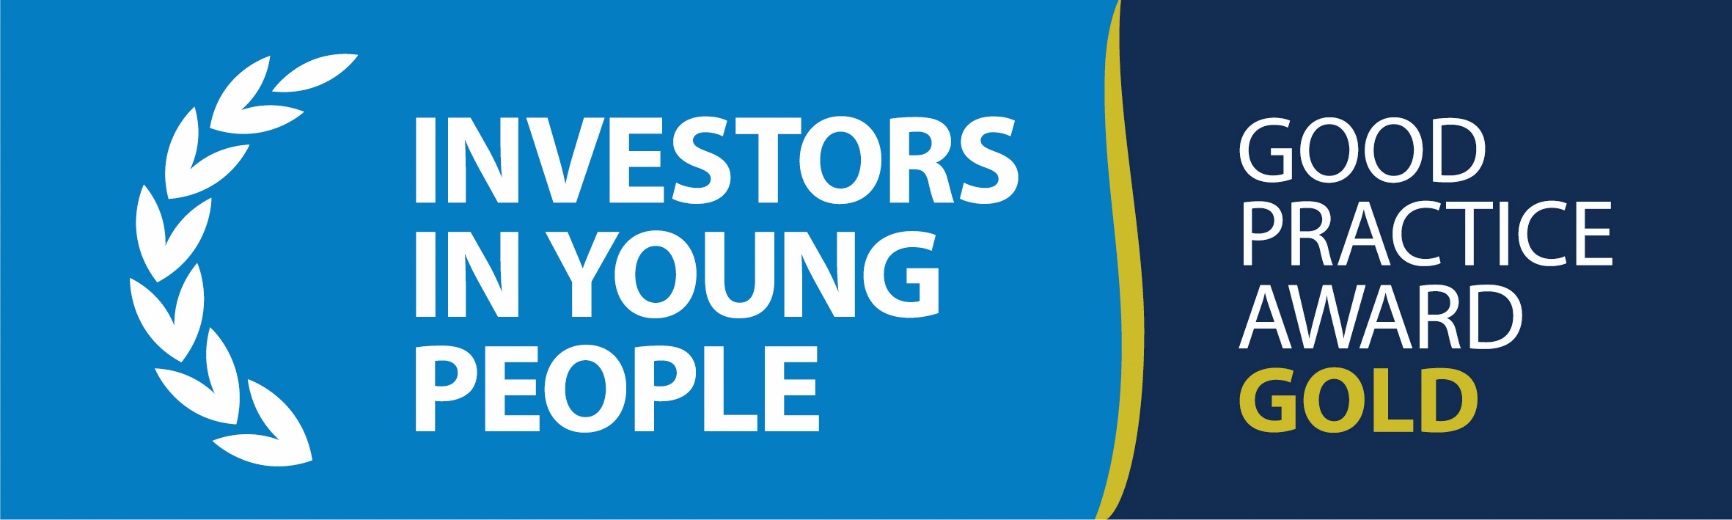 Investors in Young People Gold Award logo. White half wreath with blue background and text reads: investors in young people / good practice award gold